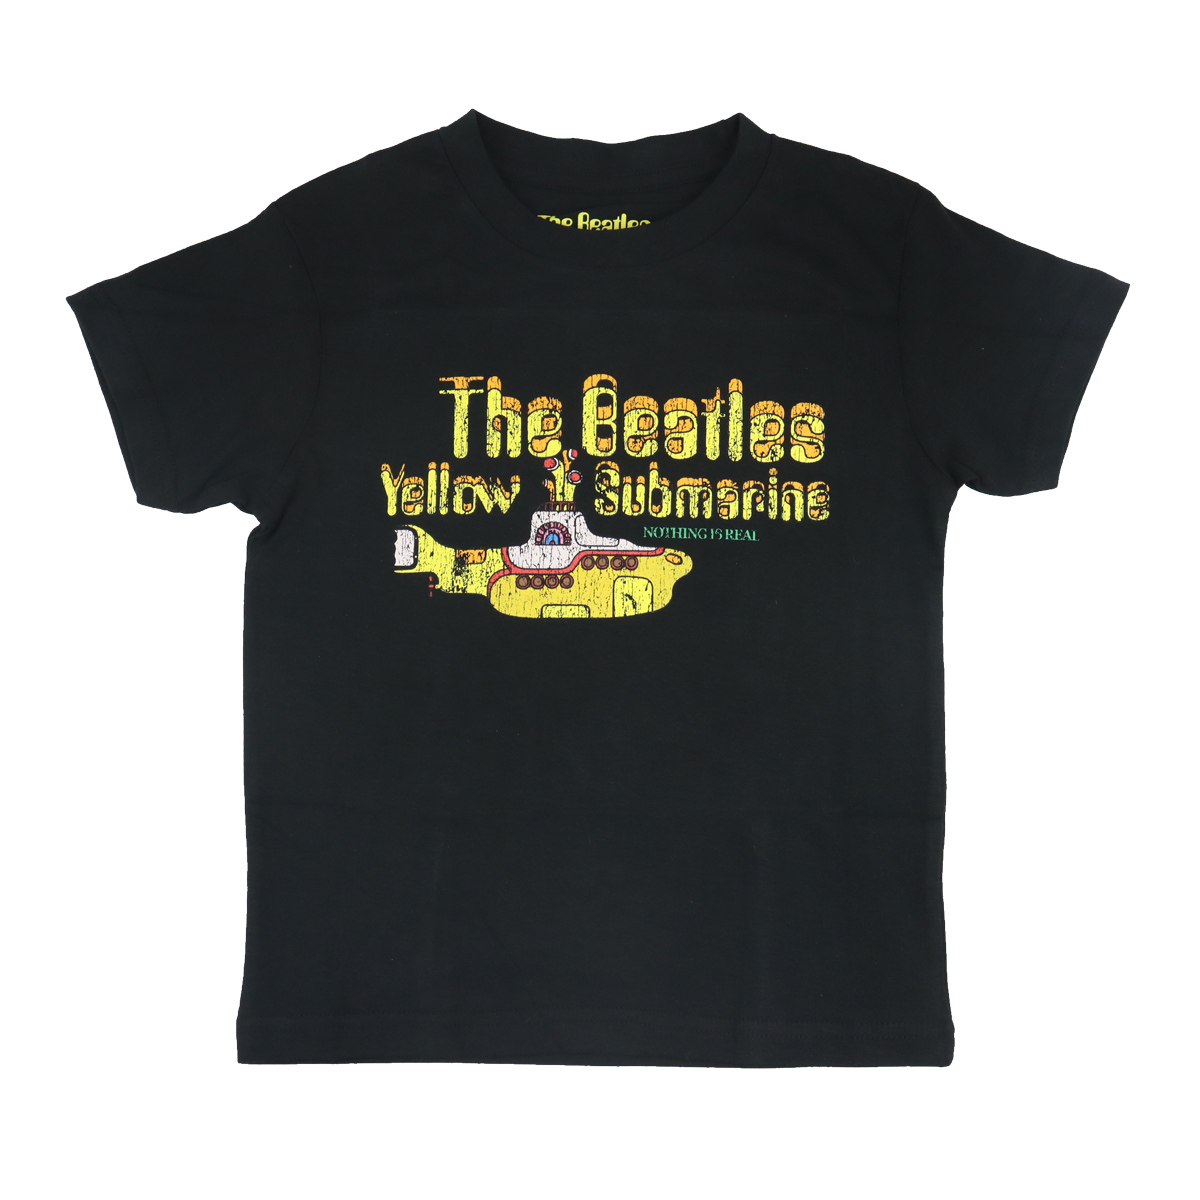 The Beatles Yellow Submarine Nothing Is Real キッズロックTシャツ - パプリカベビー